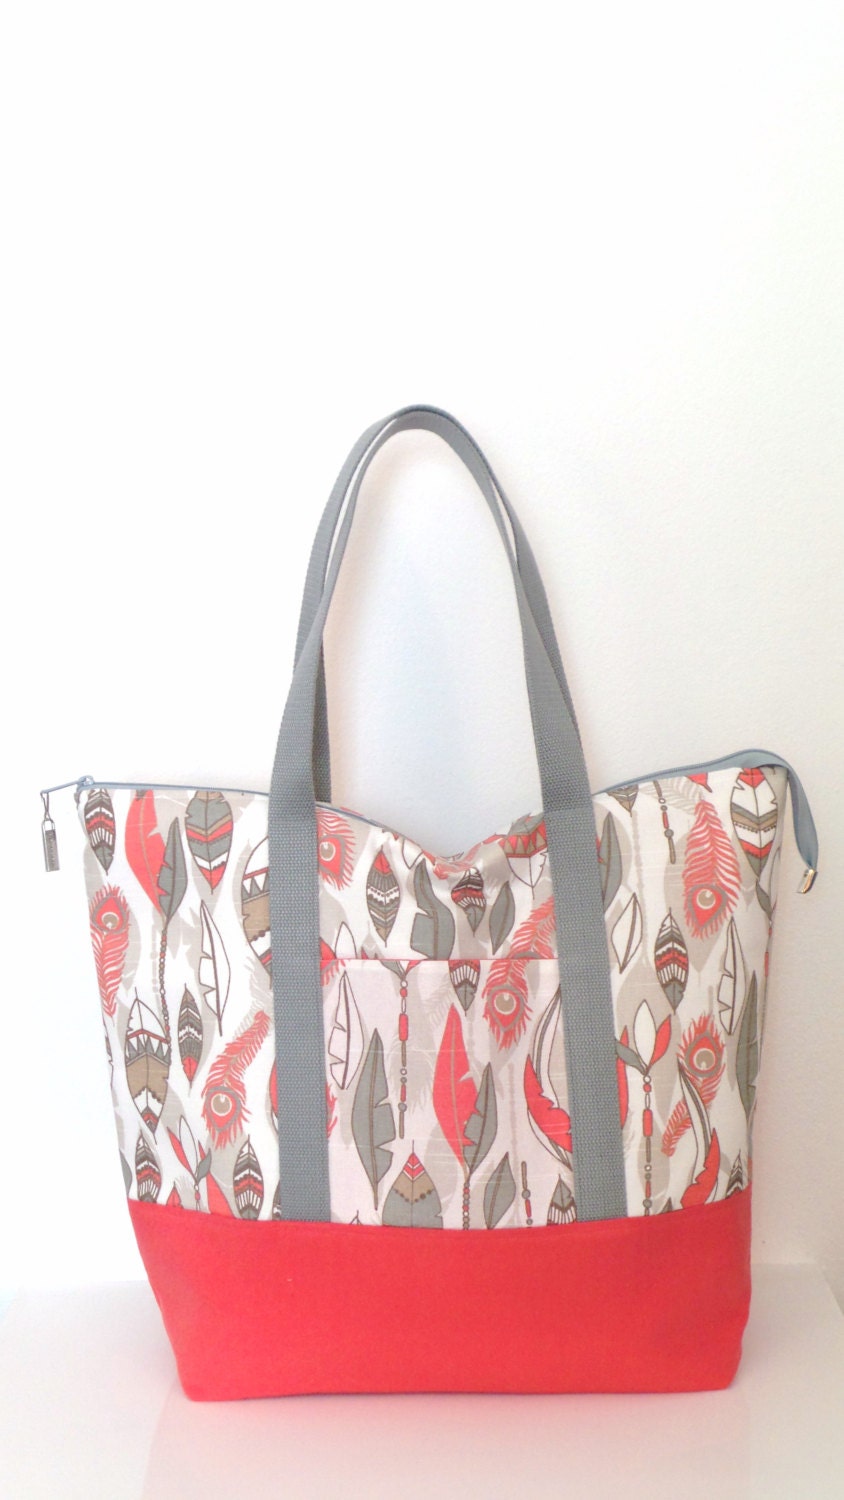 Tote Bag / Large Tote / Zippered Tote / Gym Bag by bettyscorner